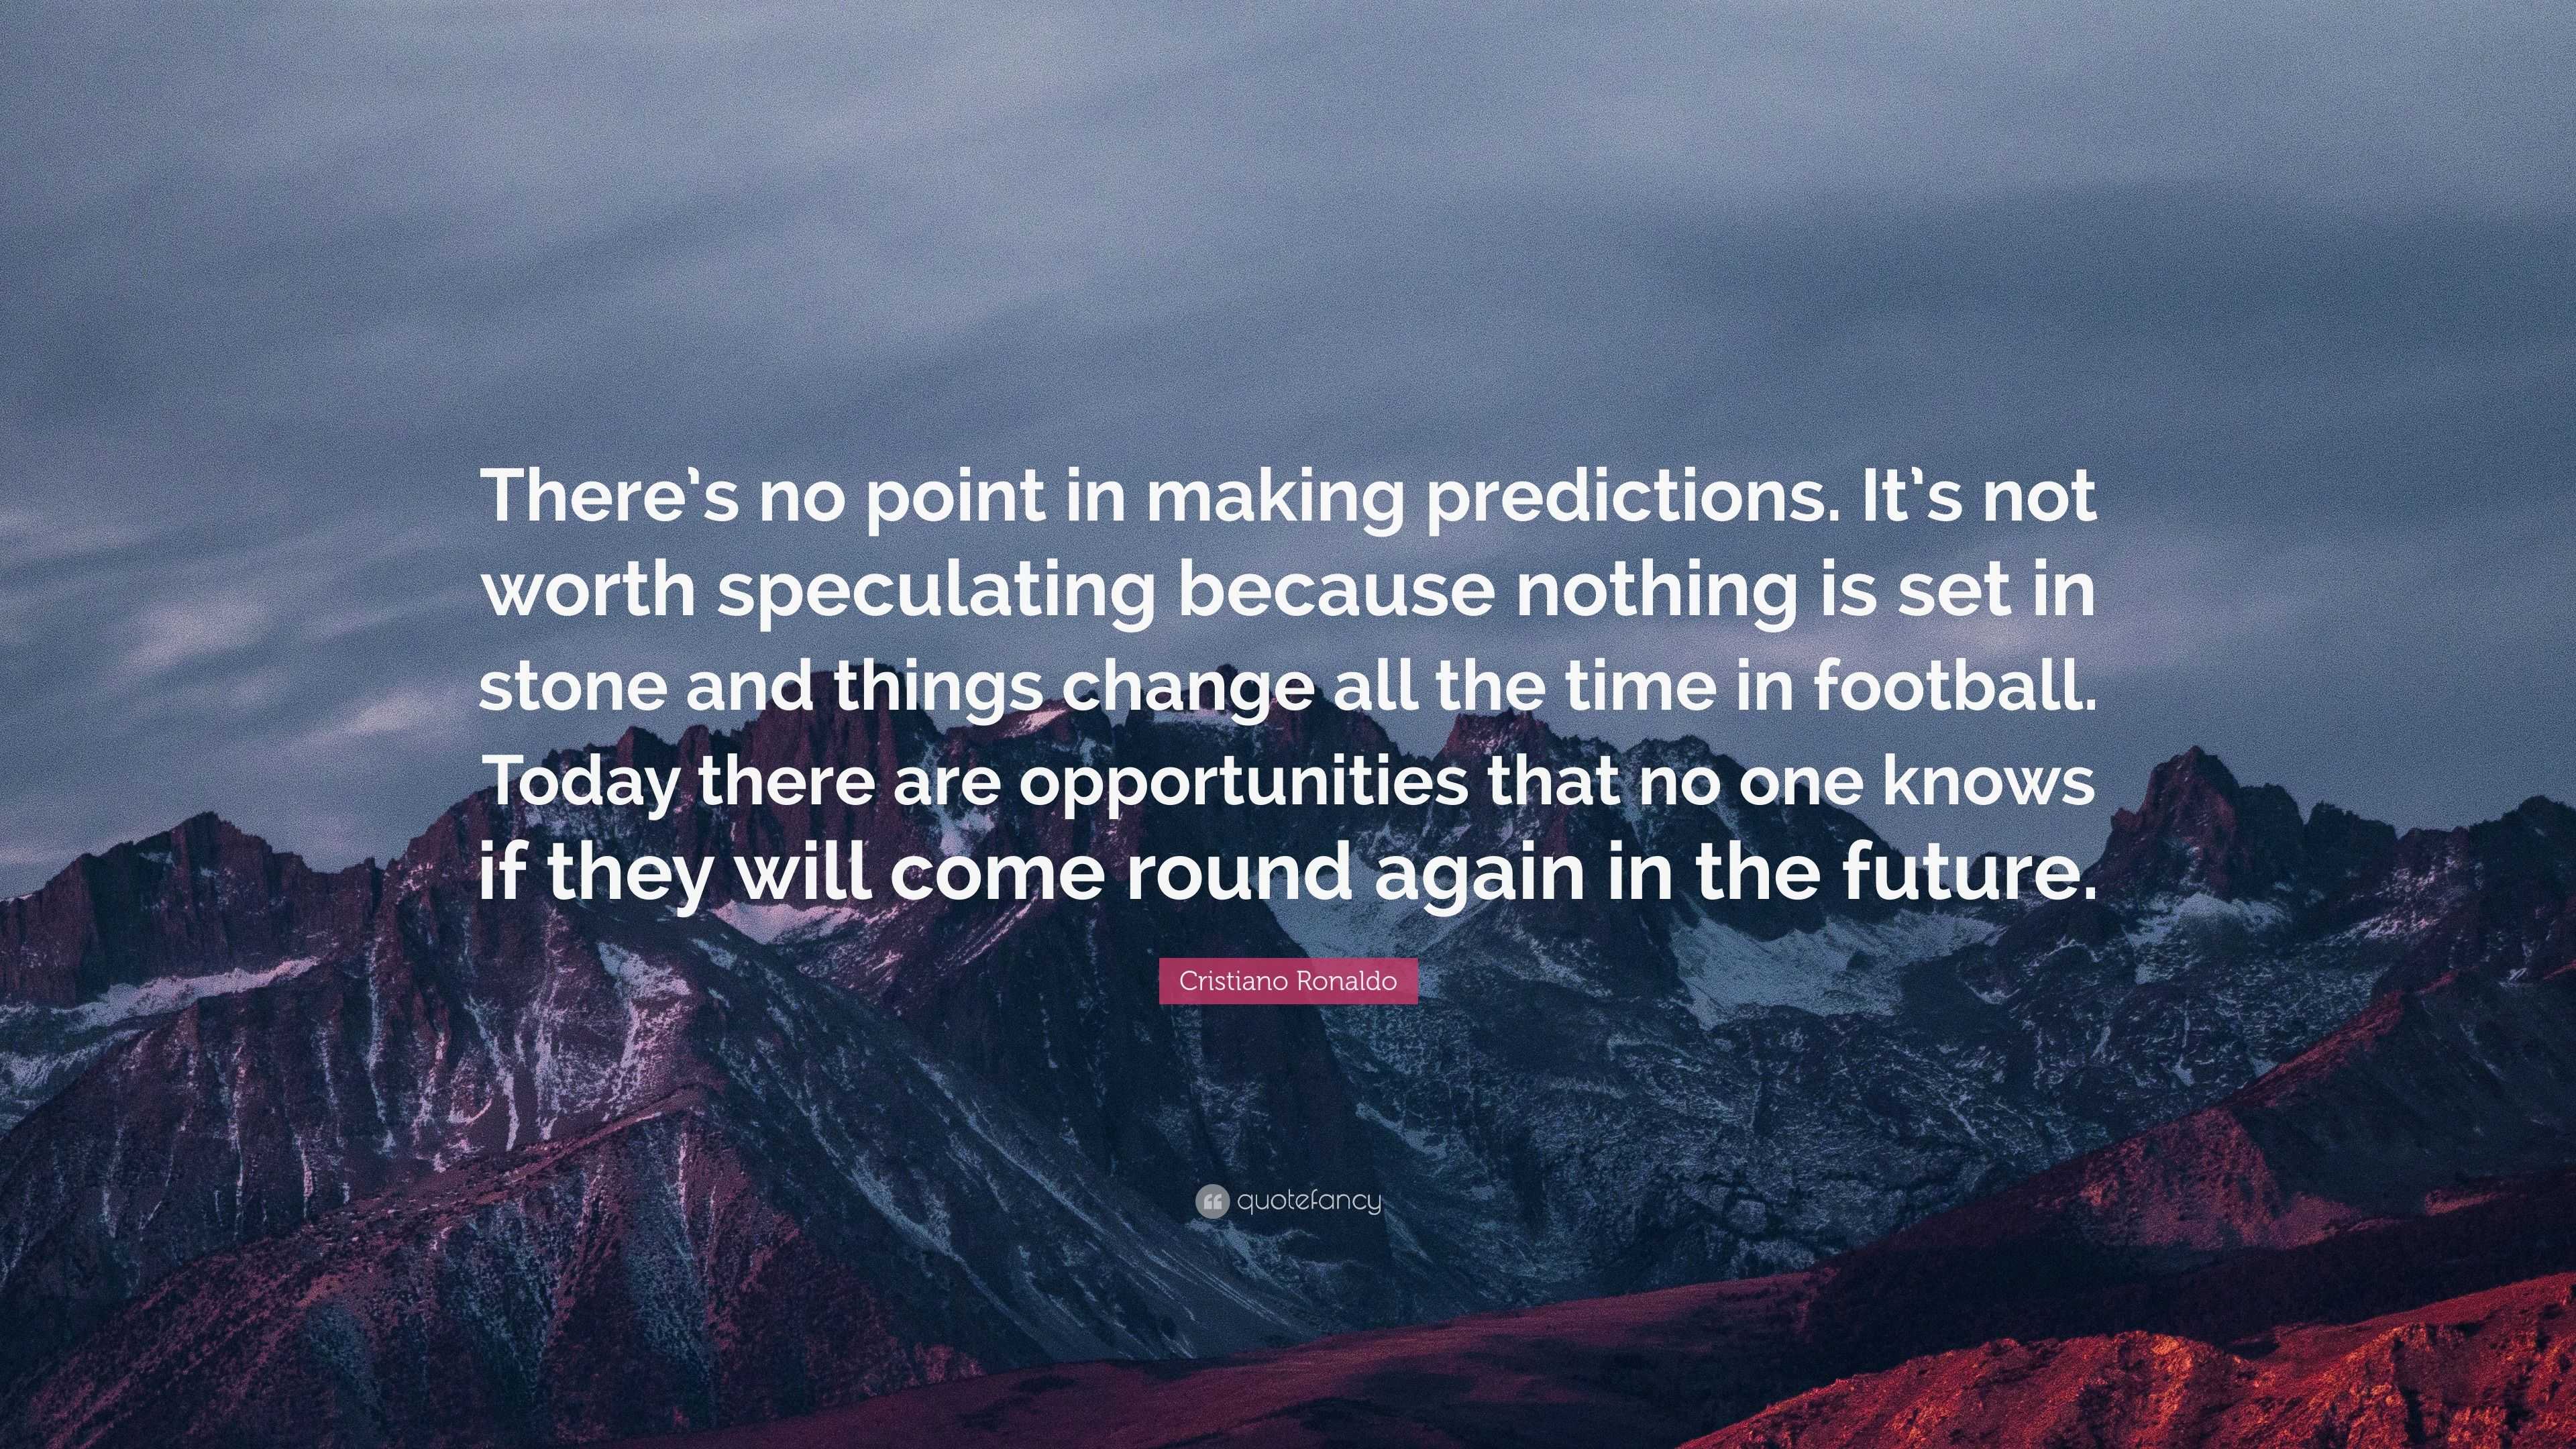 Cristiano Ronaldo Quote “There s no point in making predictions It s not worth speculating